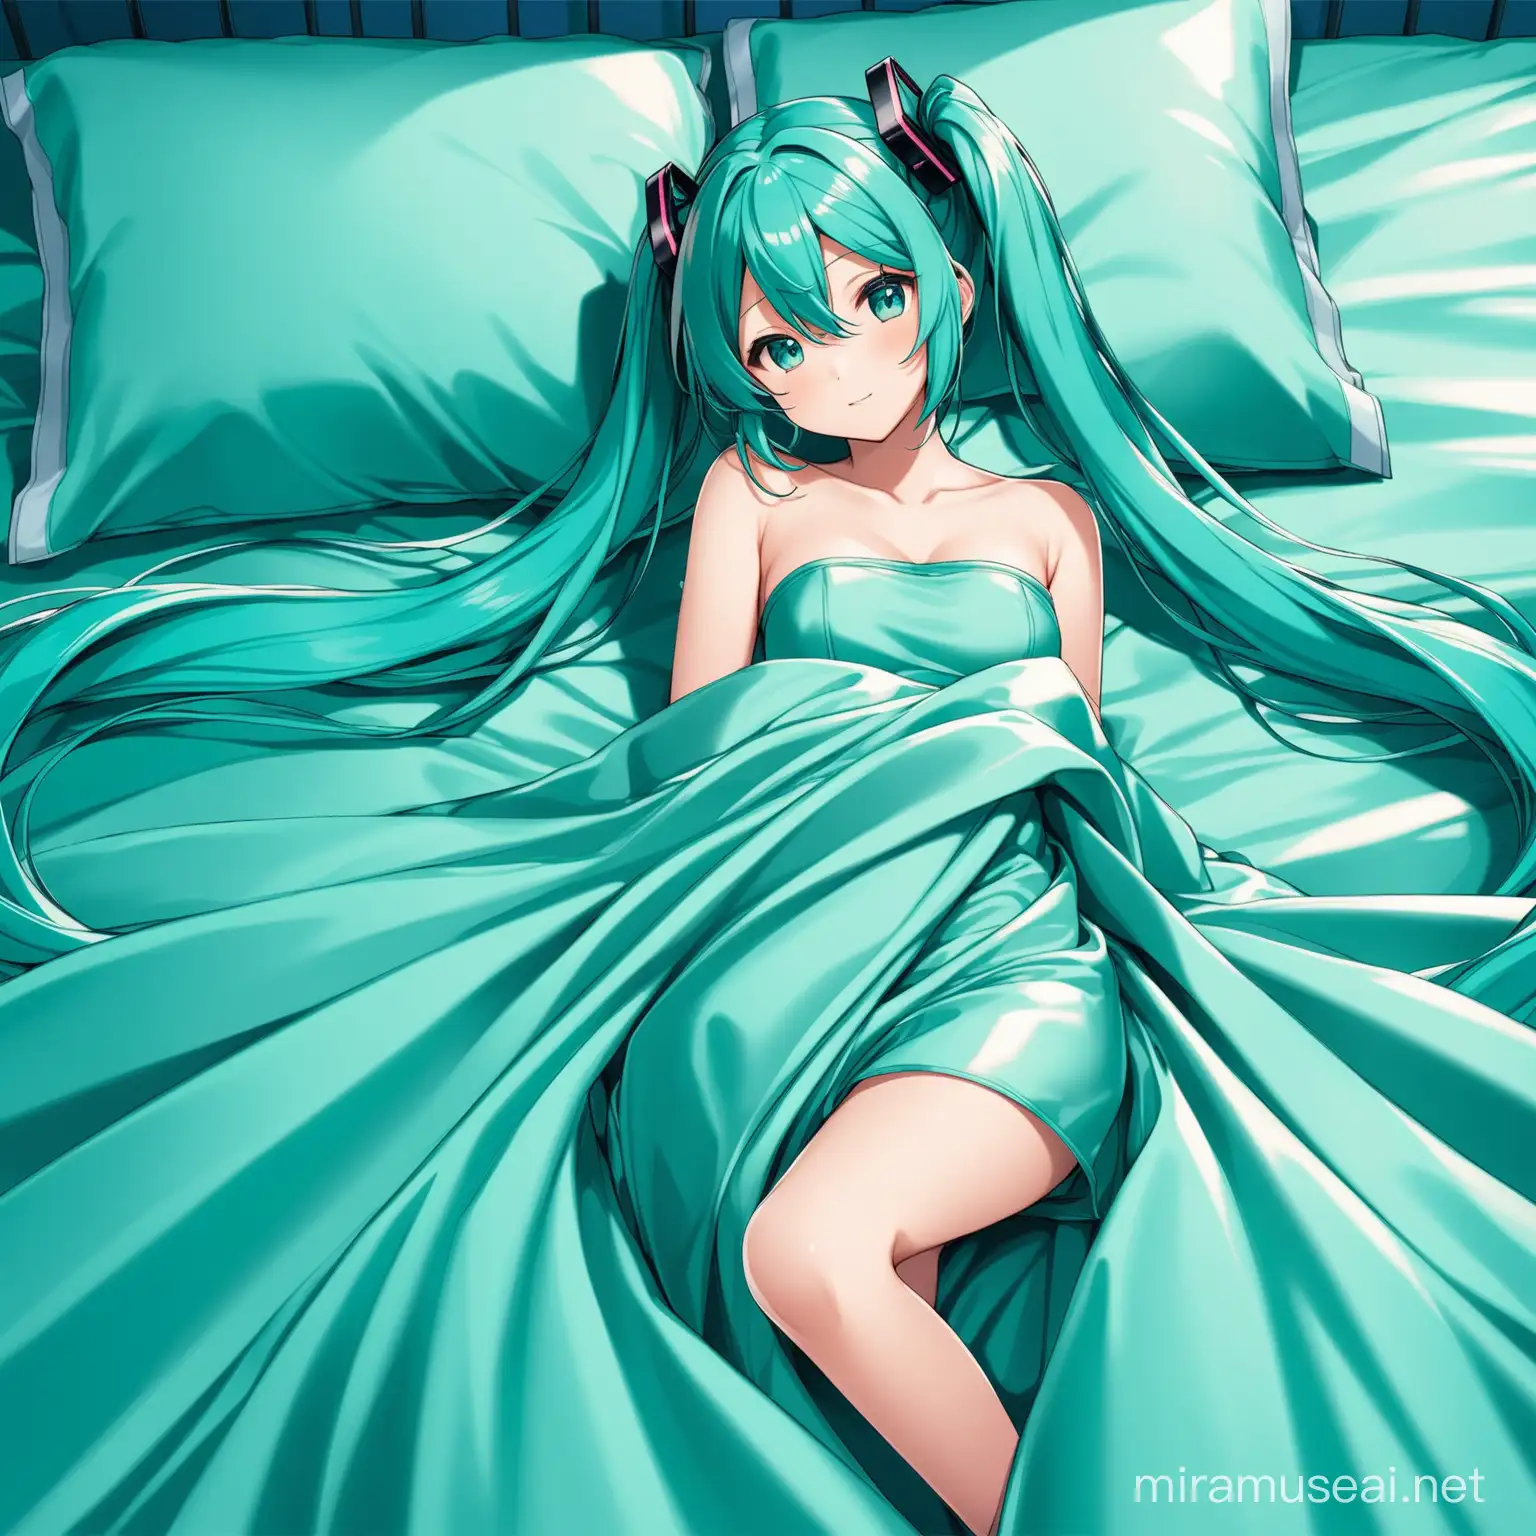 hatsune miku laying on teal satin bed covered with sheets and strapless